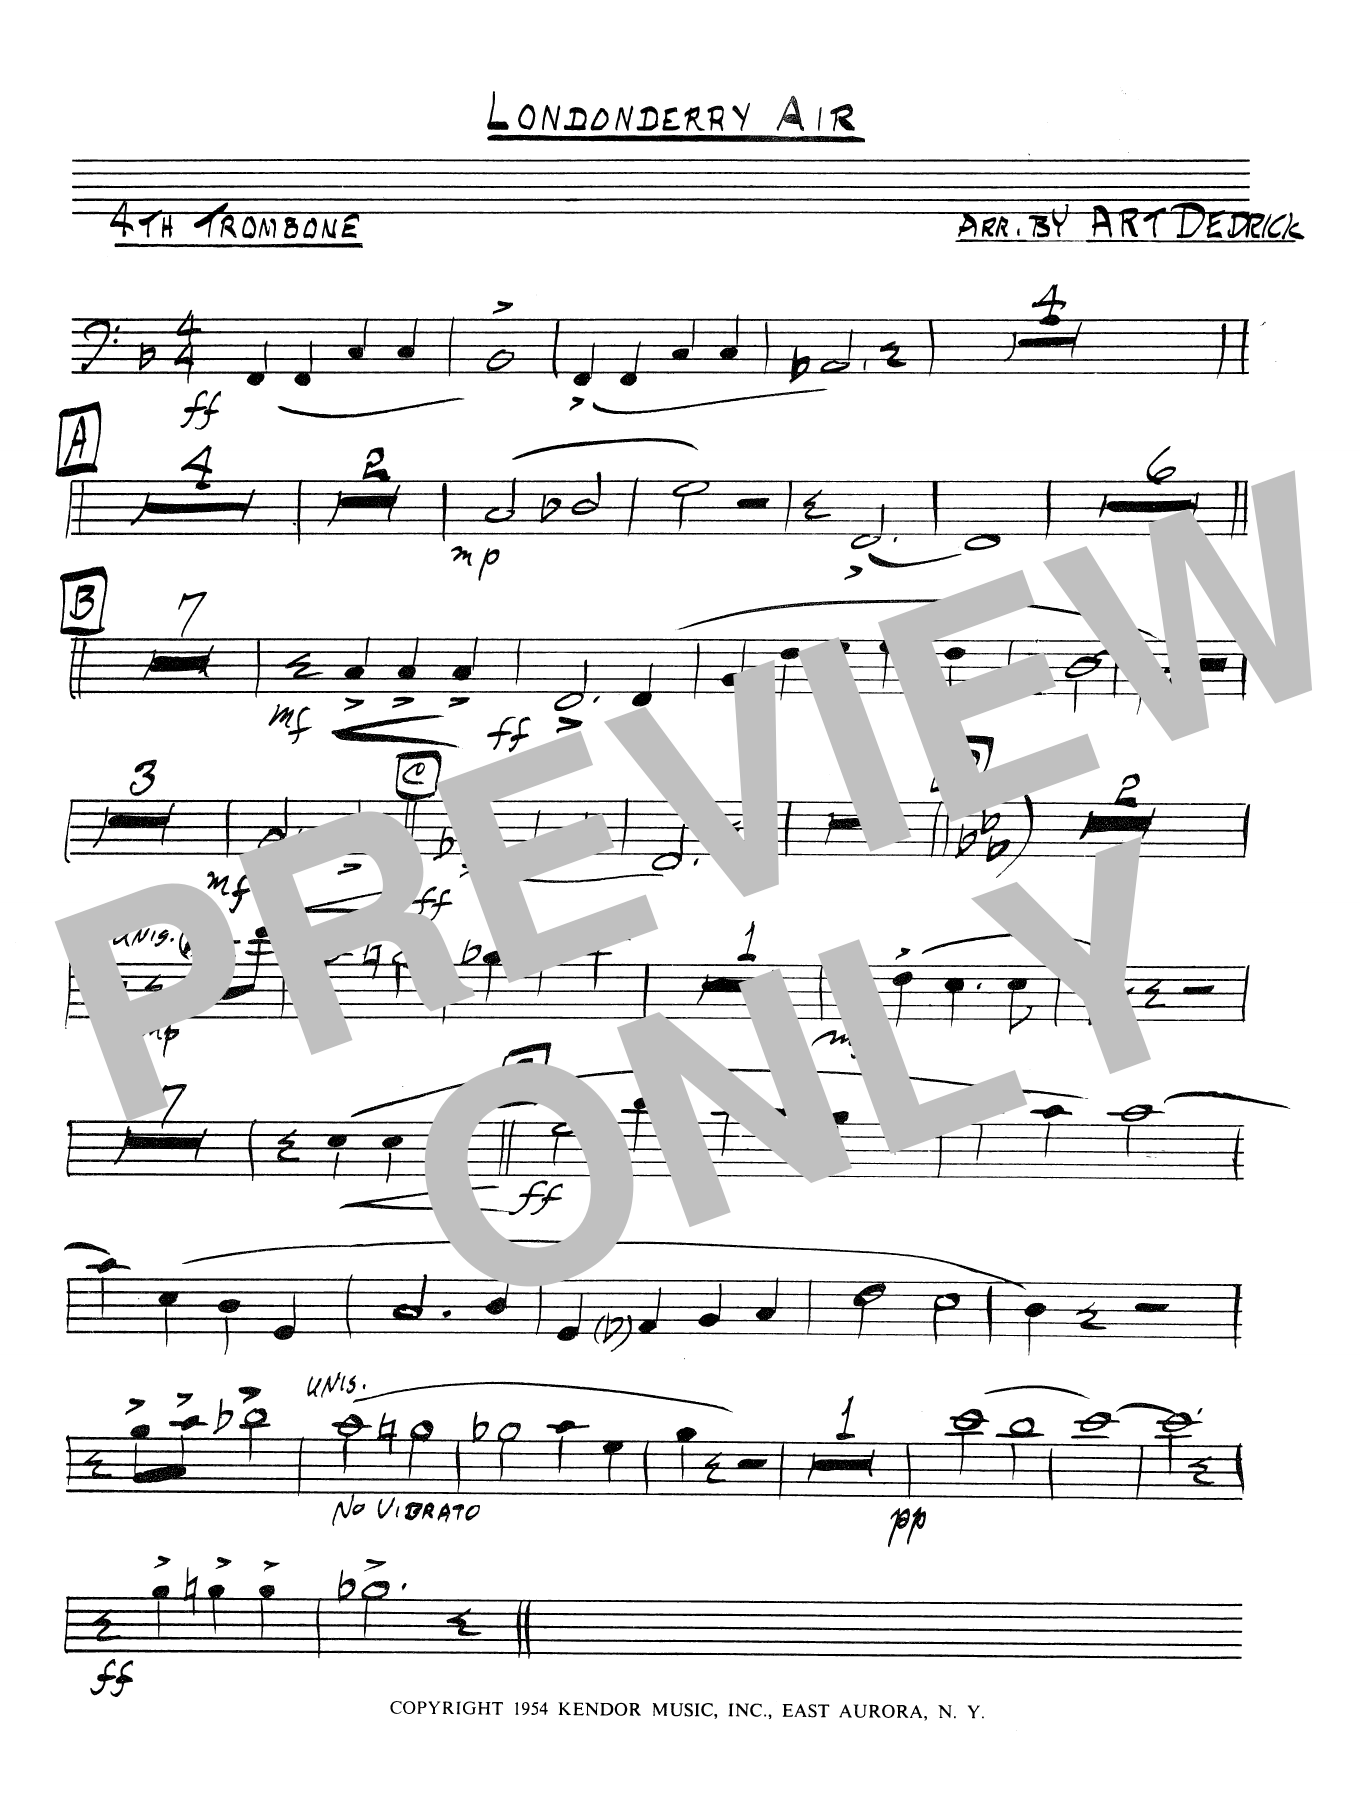 Art Dedrick Londonderry Air - 4th Trombone sheet music preview music notes and score for Jazz Ensemble including 1 page(s)